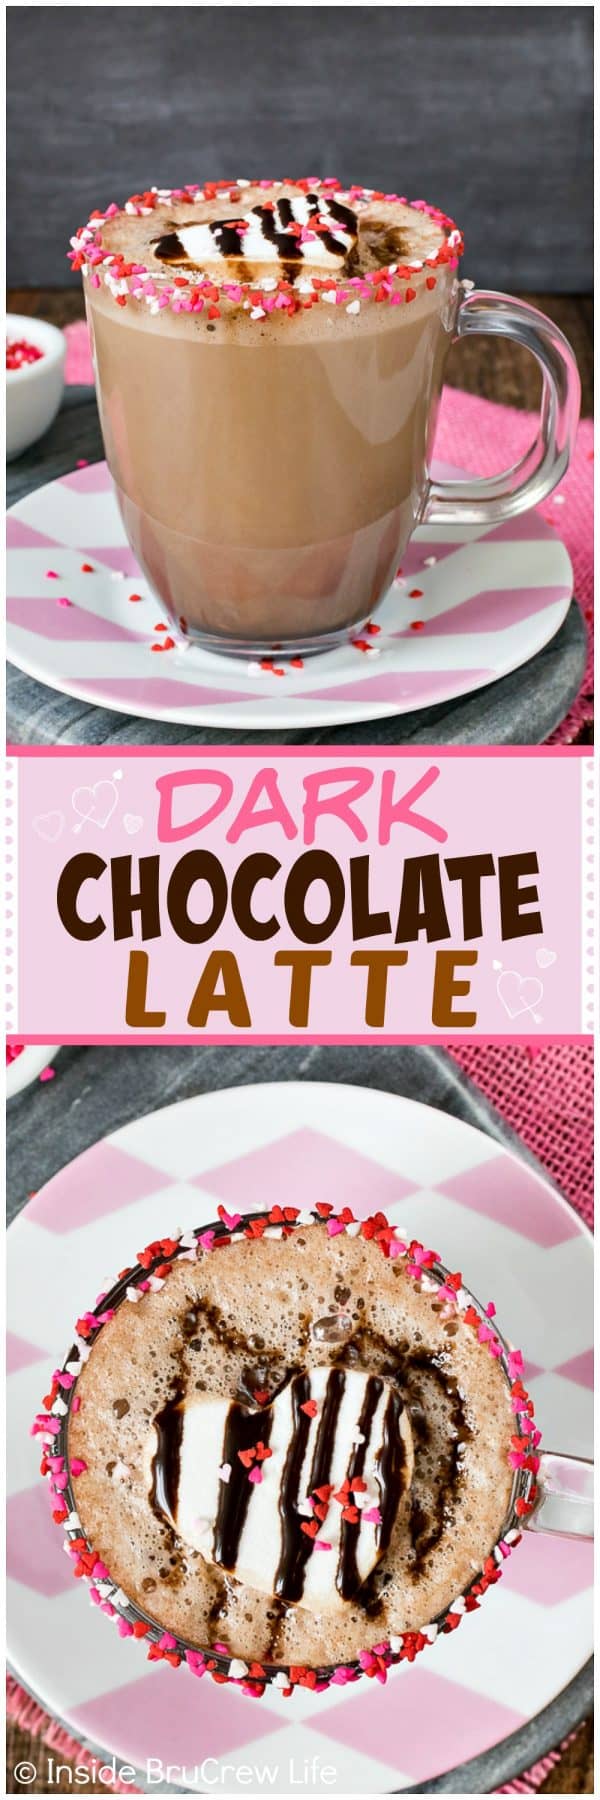 Dark Chocolate Latte - a rim of sprinkles and two times the chocolate makes this a delicious coffee drink. Easy recipe to make at home to save money. #coffee #chocolate #latte #drink #homemade #coffeeshop 